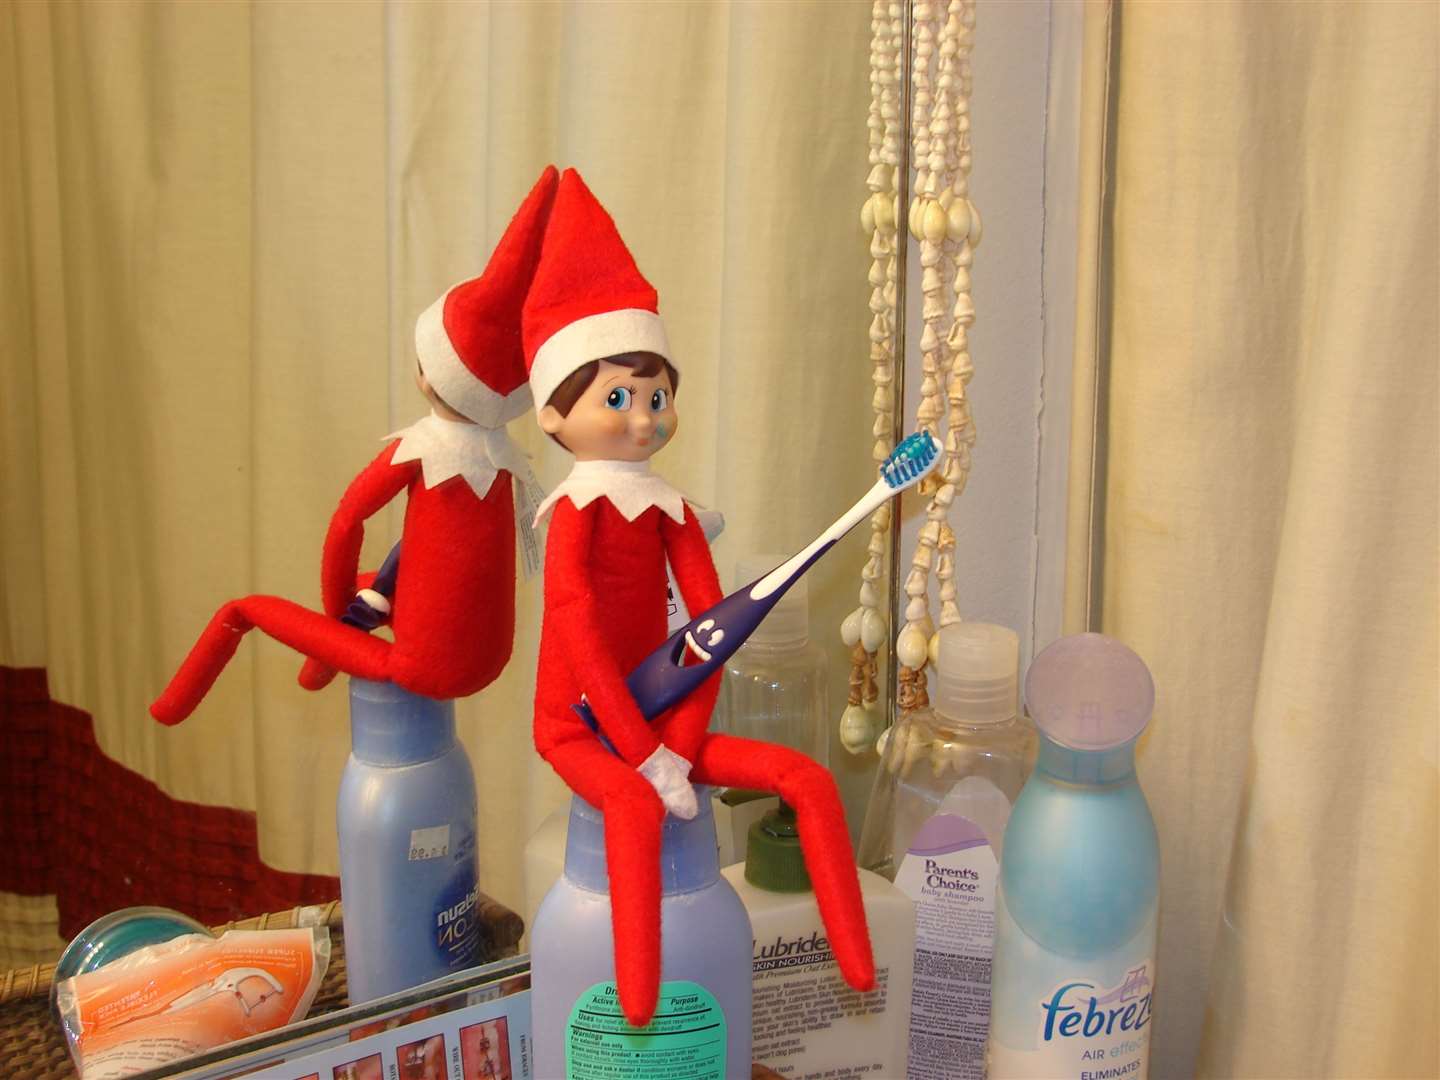 The Elf on the Shelf is gearing up to make his arrival in homes across the UK